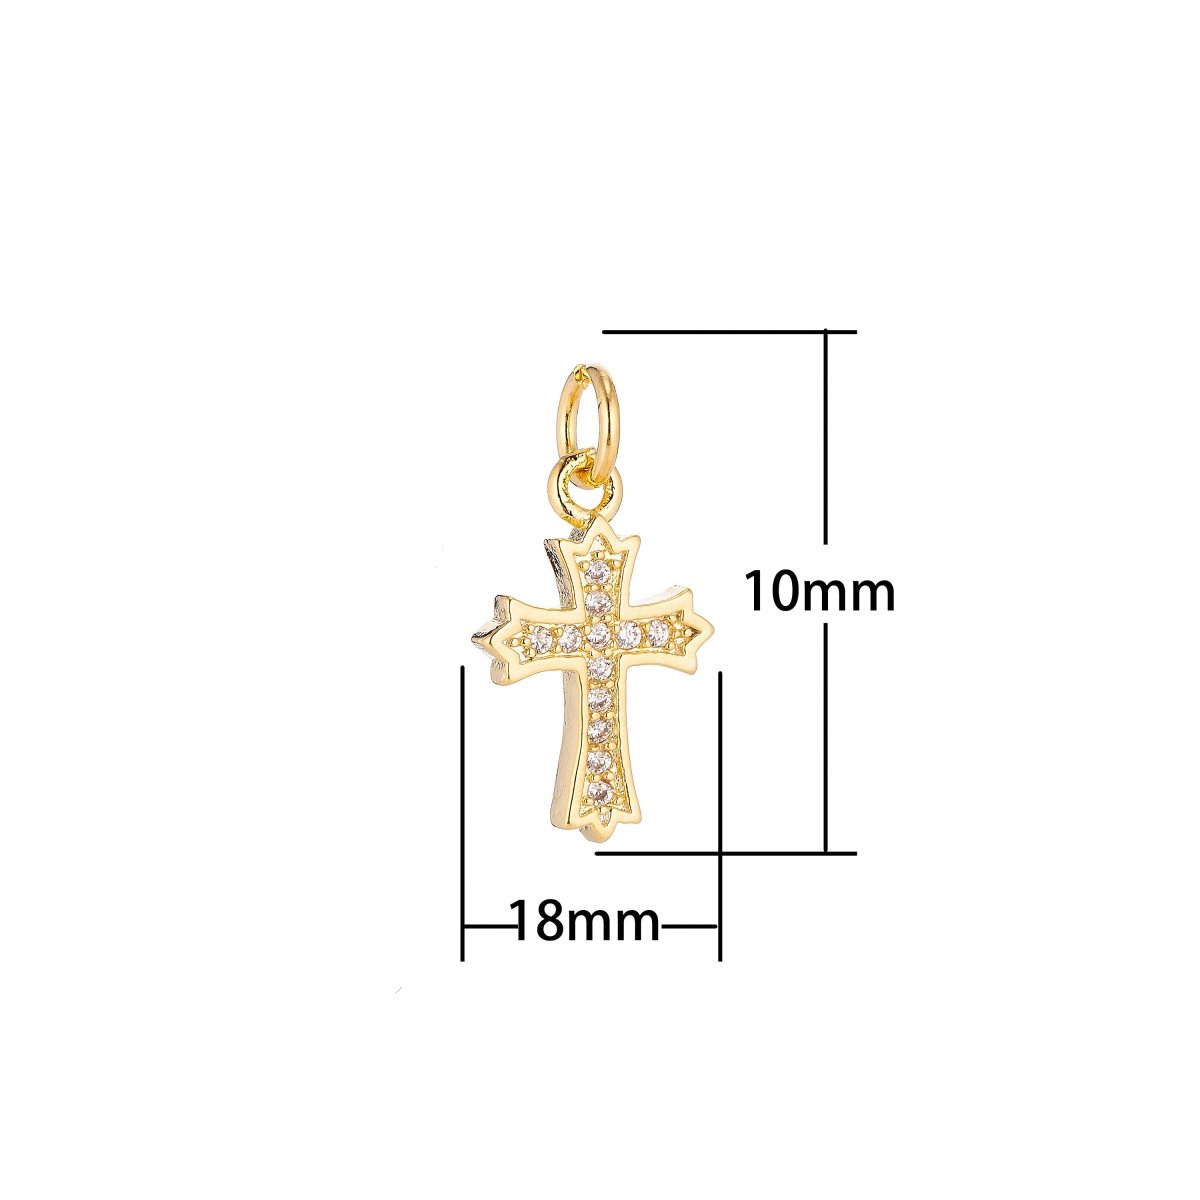 Gold Filled Ornate Cross Catholic Christian Religious Cubic Zirconia Necklace Pendant Bracelet Earring Charm for Jewelry Making C-069 - DLUXCA